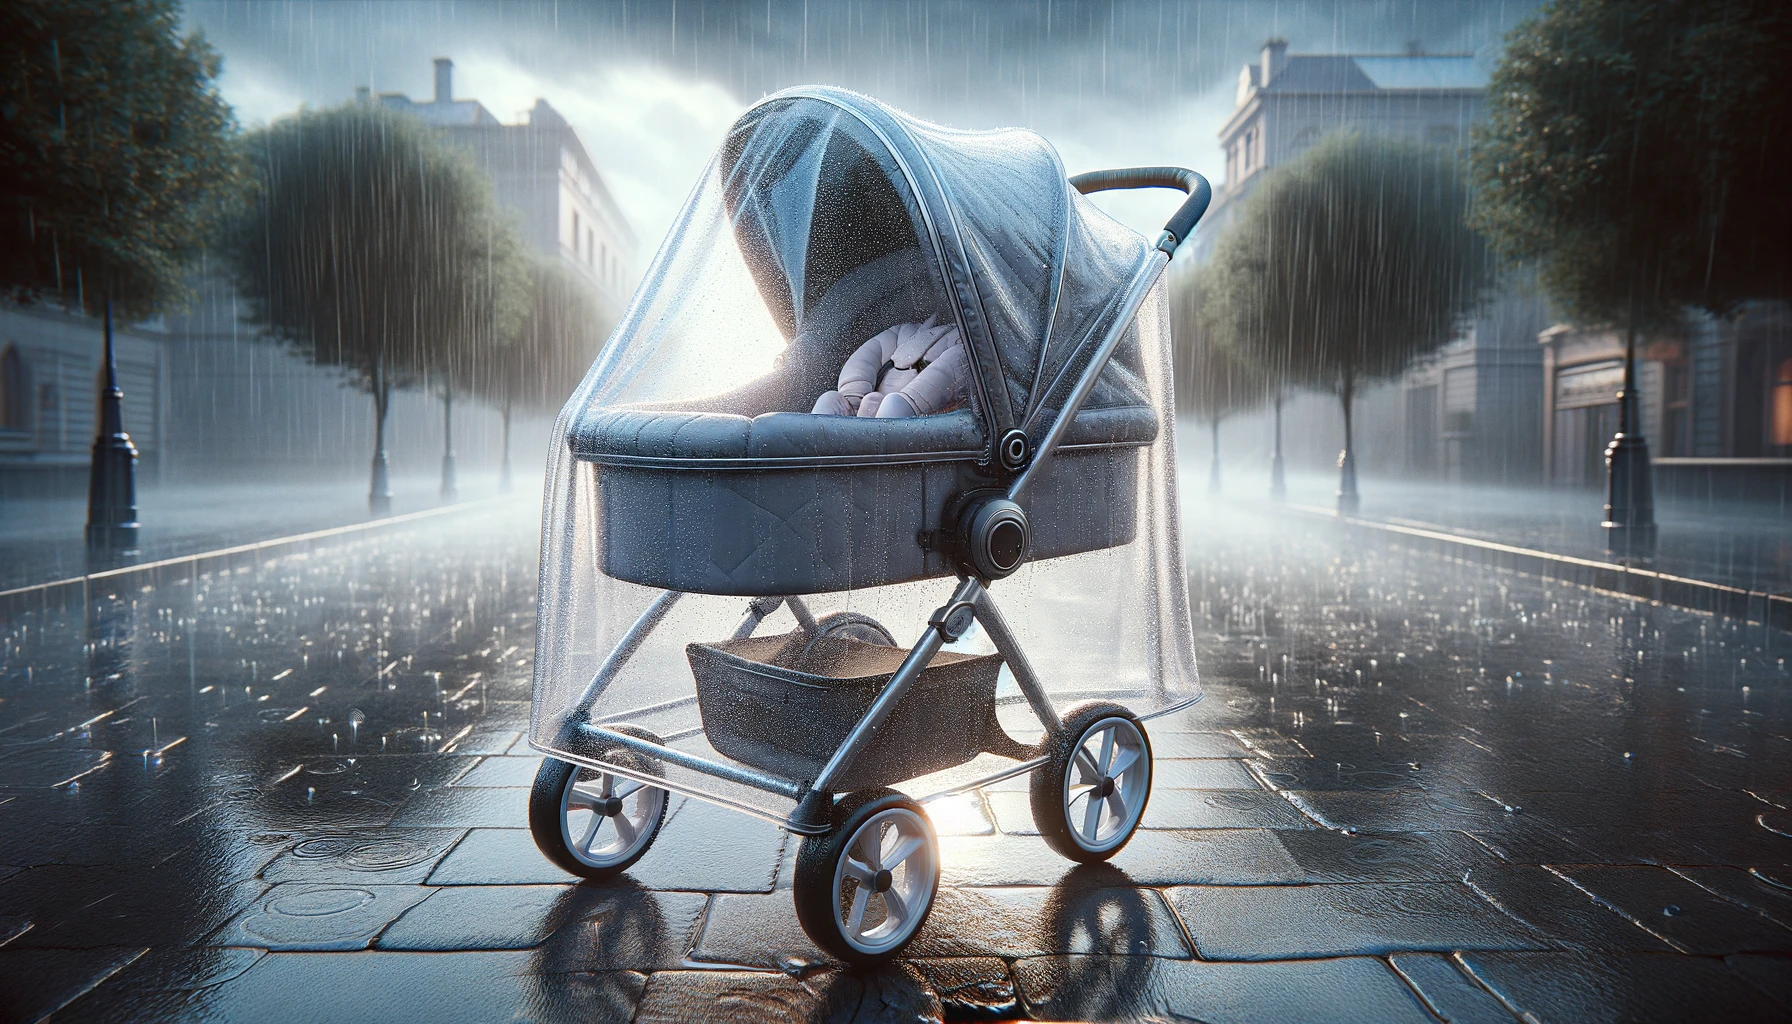 An image depicting a stroller with a rain cover protecting it from the rain. The scene is set outdoors, possibly in a park or on a city sidewalk, under a cloudy, rainy sky. The rain cover is made of clear, waterproof material, allowing a view of the stroller inside. The stroller appears cozy and dry, with the rain droplets visibly beading up and rolling off the cover. The background might show a wet environment, with rain puddles on the ground and trees or buildings slightly blurred by the rainfall. The overall atmosphere conveys a sense of protection and care, highlighting the rain cover's effectiveness in keeping the baby dry and comfortable.